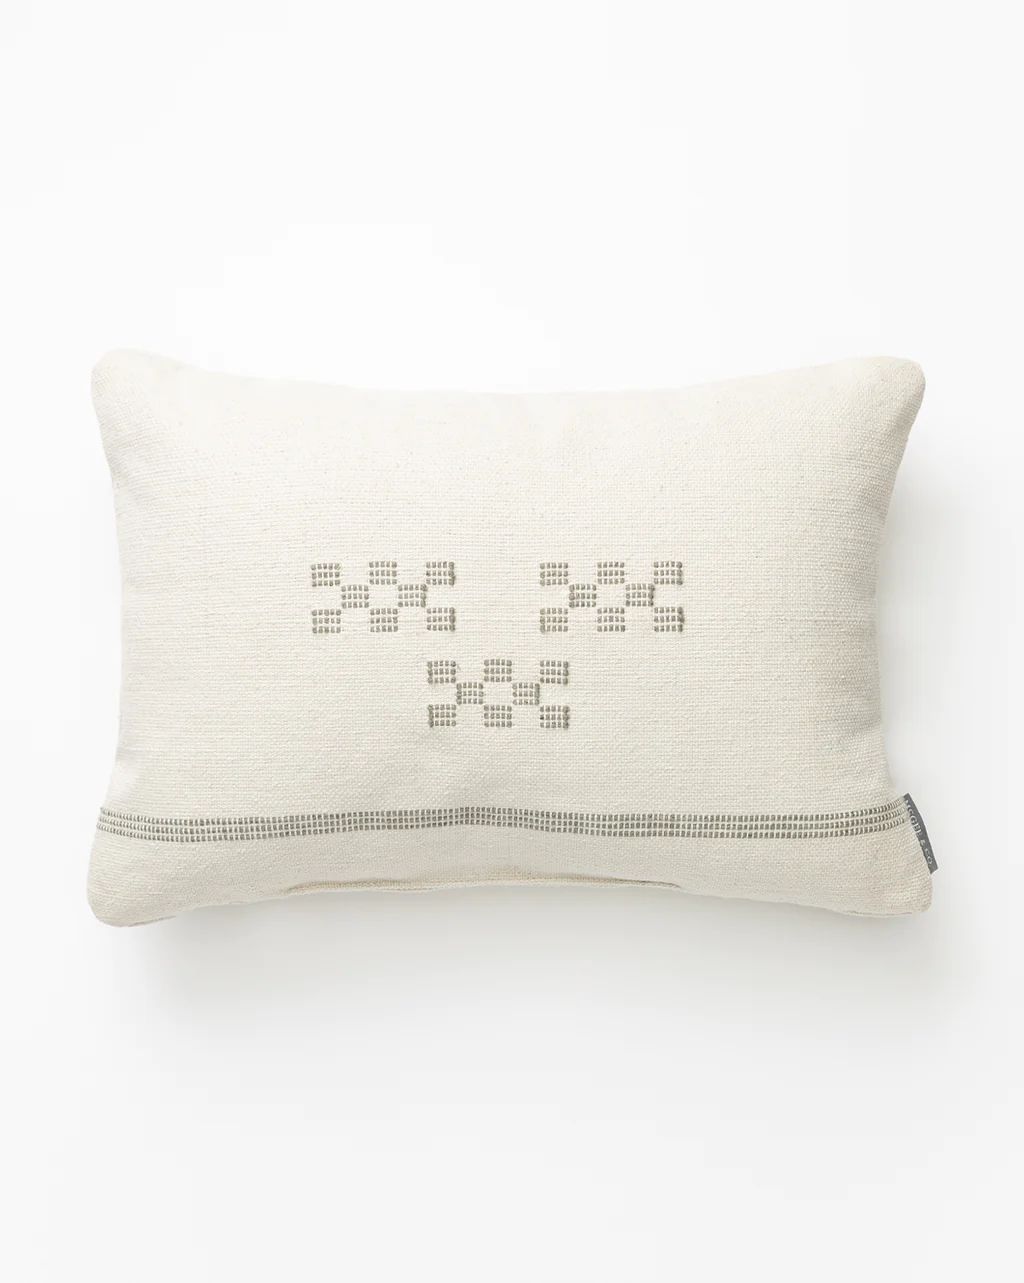 Paley Indoor/Outdoor Pillow | McGee & Co.